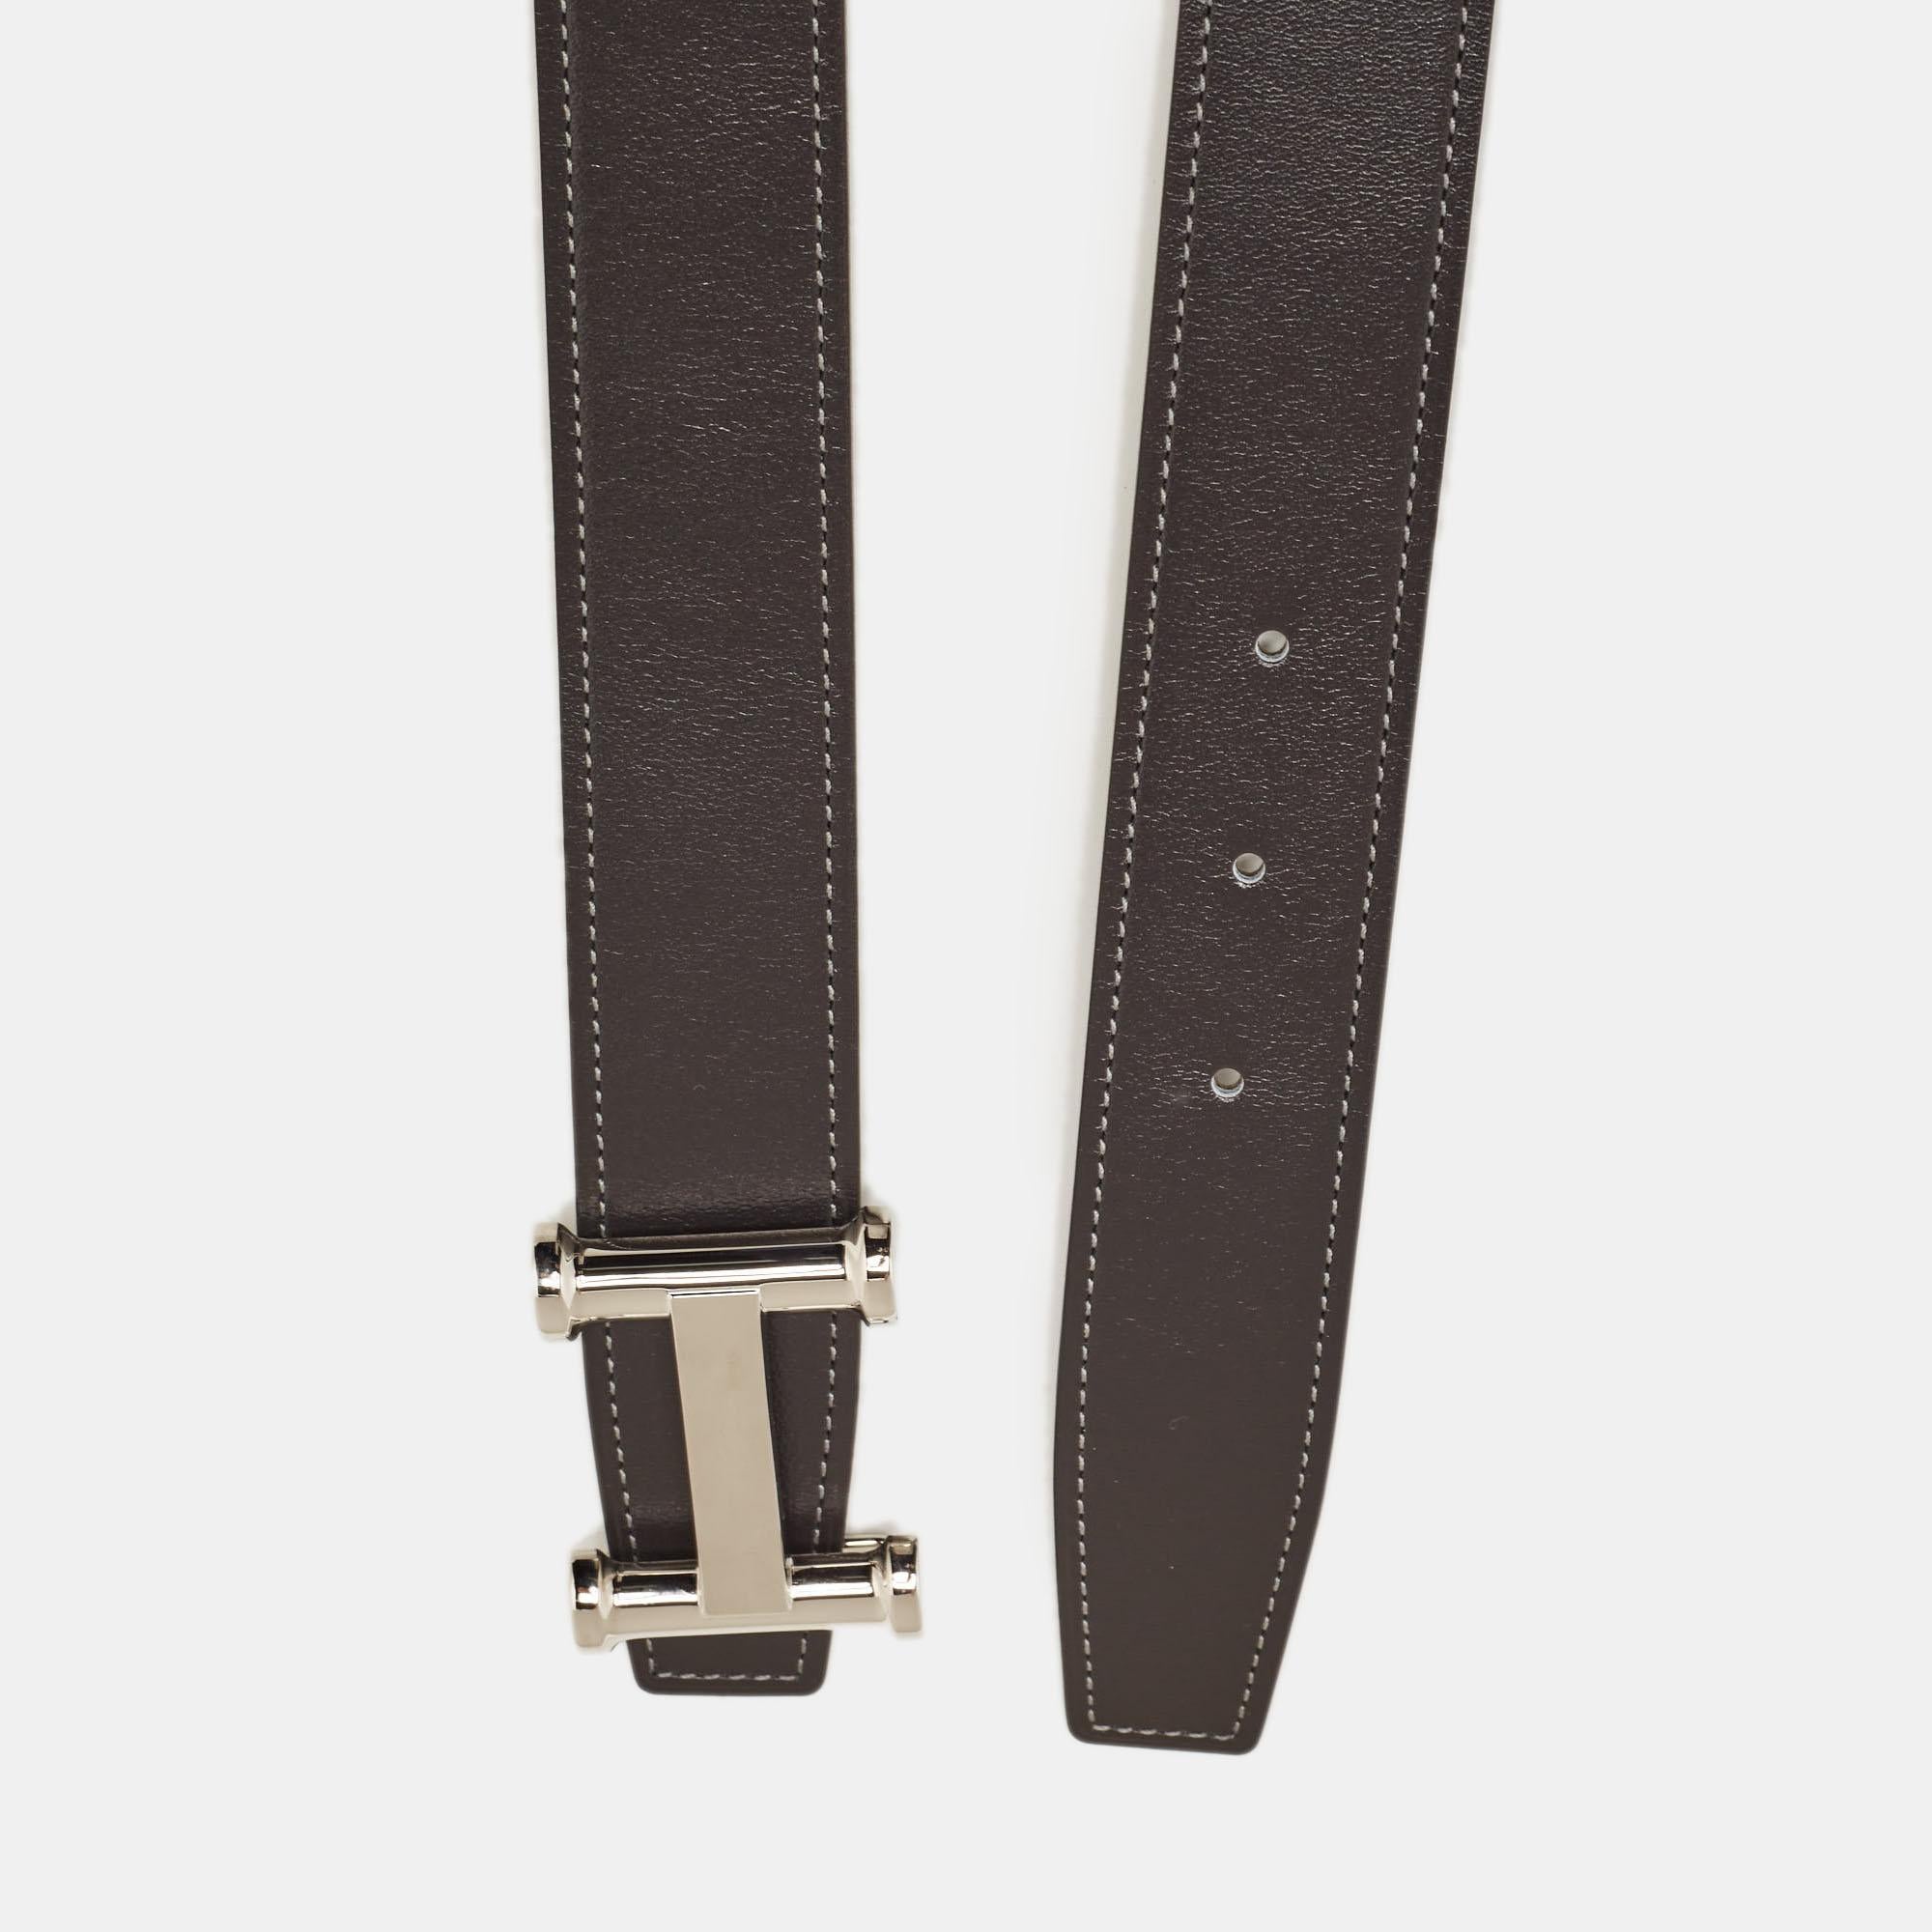 A classic add-on to your collection of belts, this Hermes piece has been crafted from leather. It will perfectly complement your formals.

